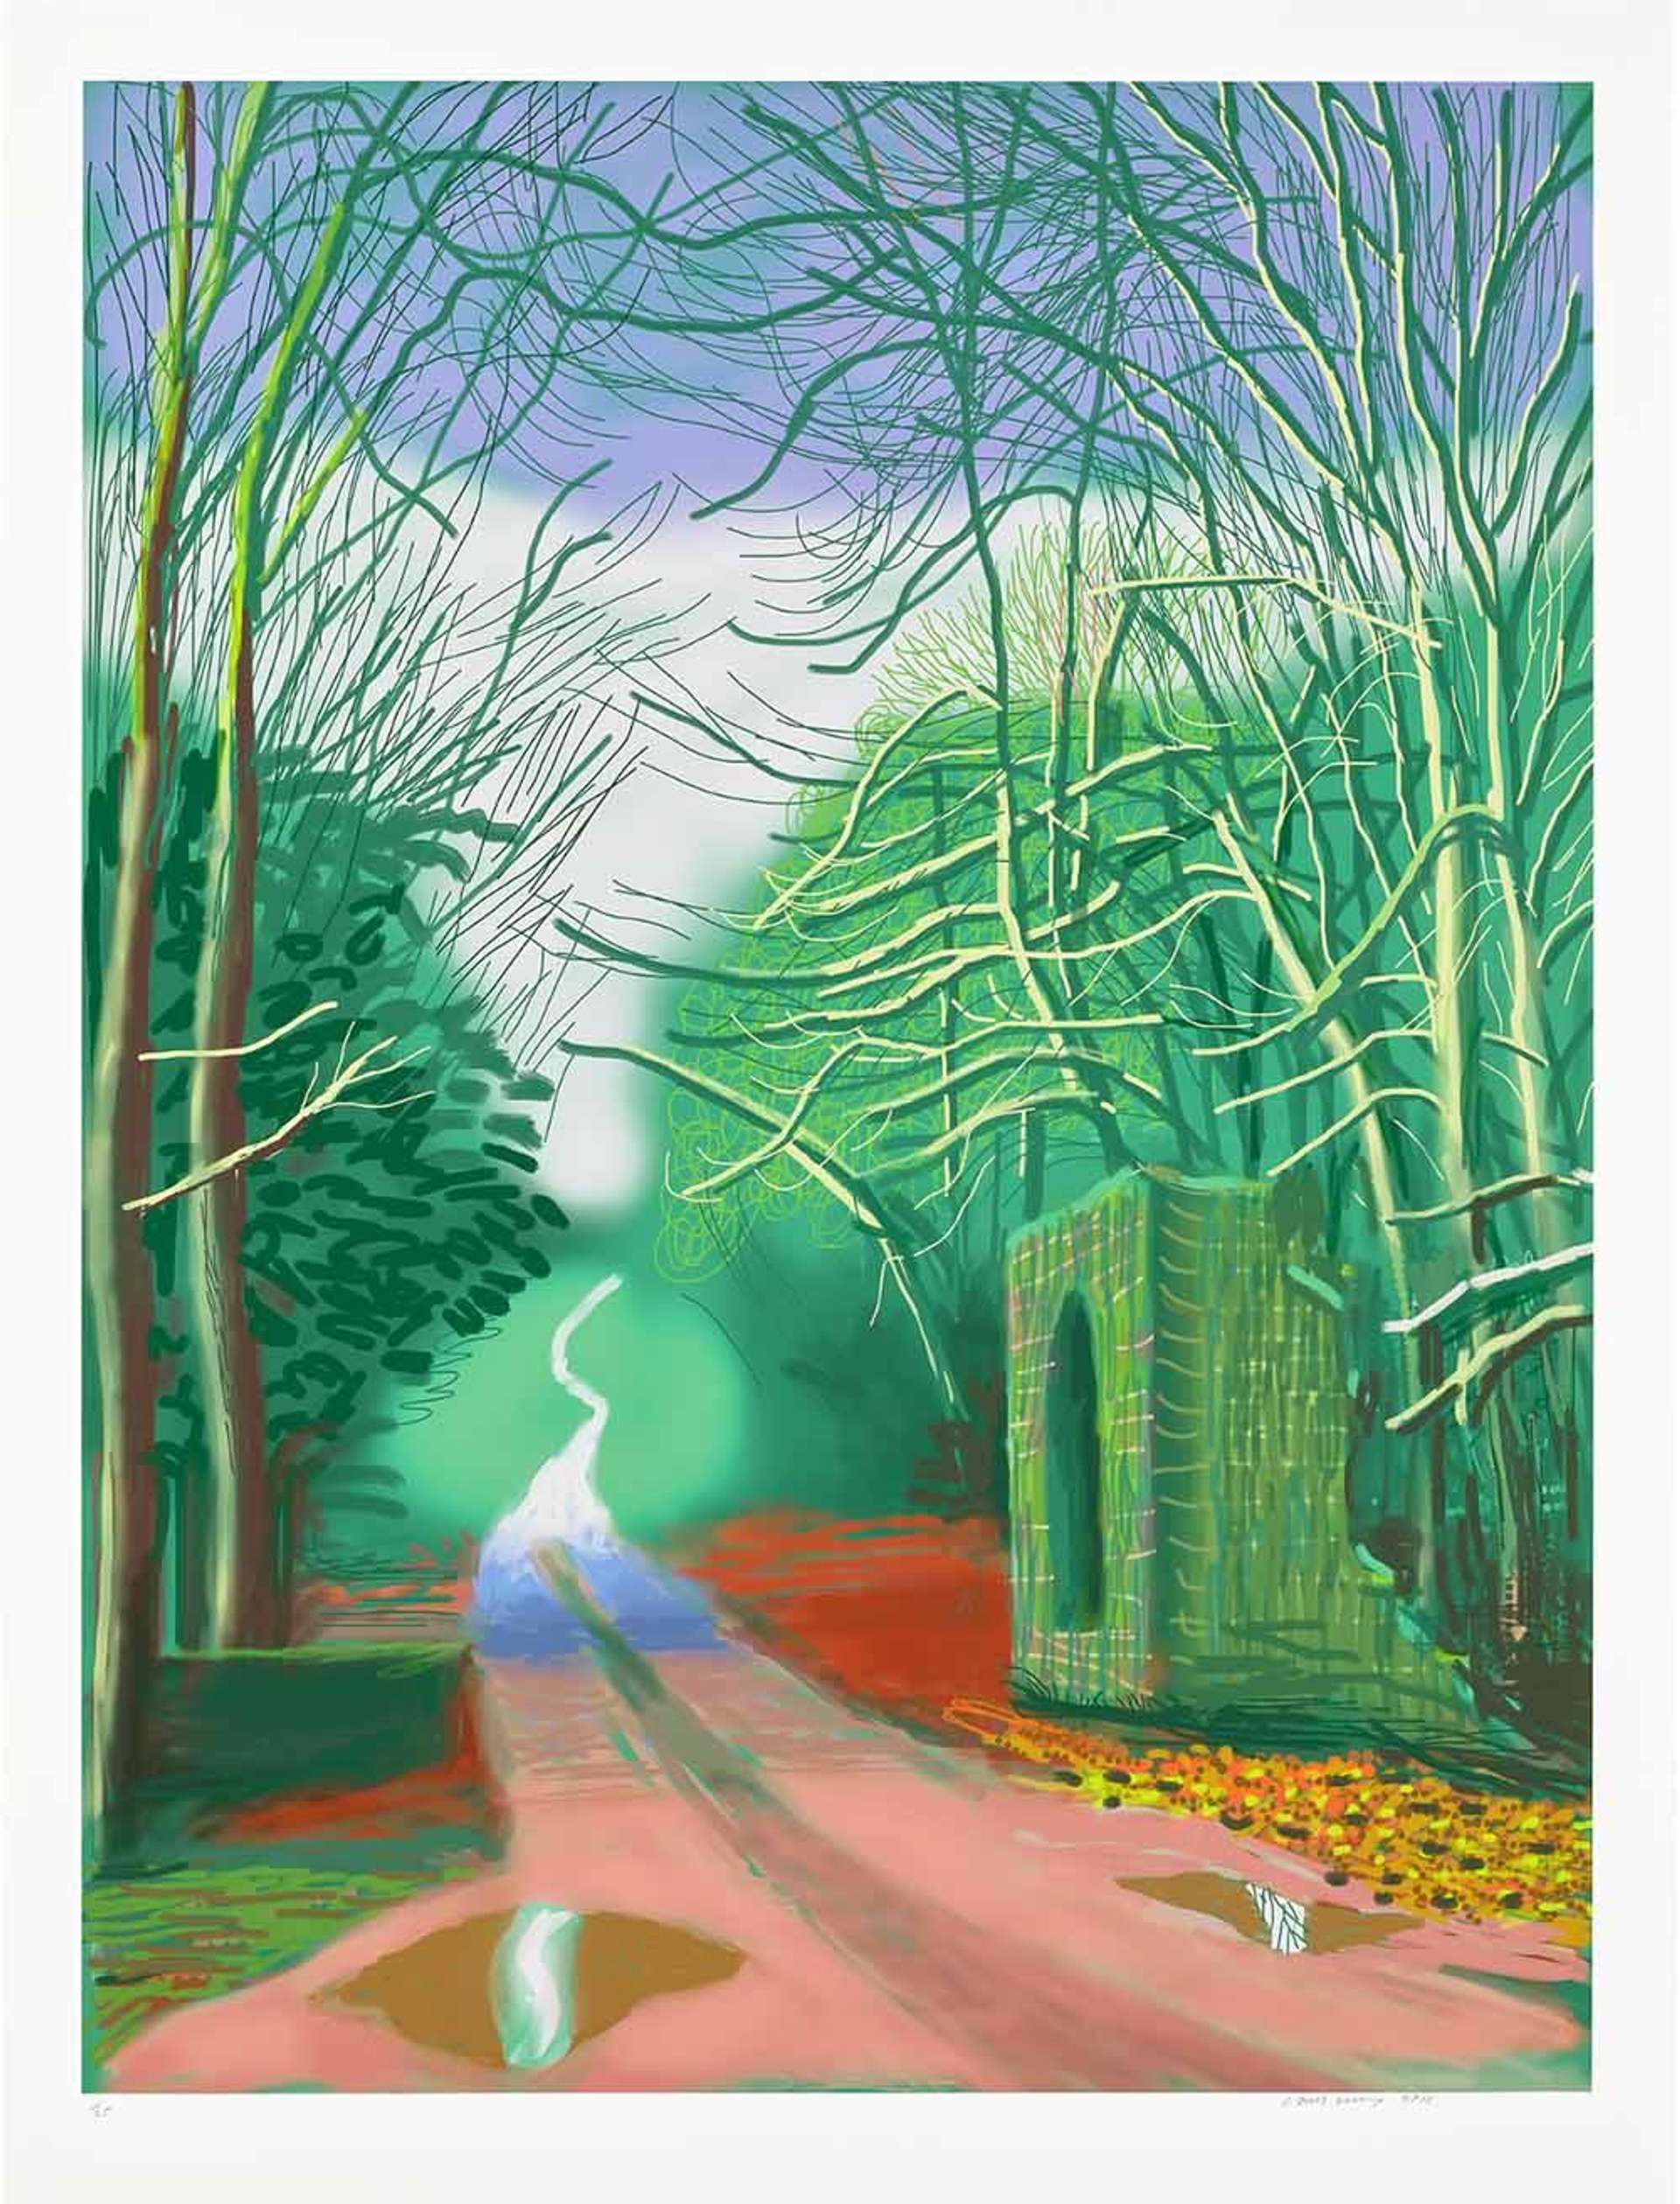 A digital drawing, executed on Hockney's iPad, depicting a quiet country lane. The image is executed in vibrant shades of green, blue, and brown. The road stretches to a vantage point at the centre of the composition, surrounded by trees and green shrubbery on either side.